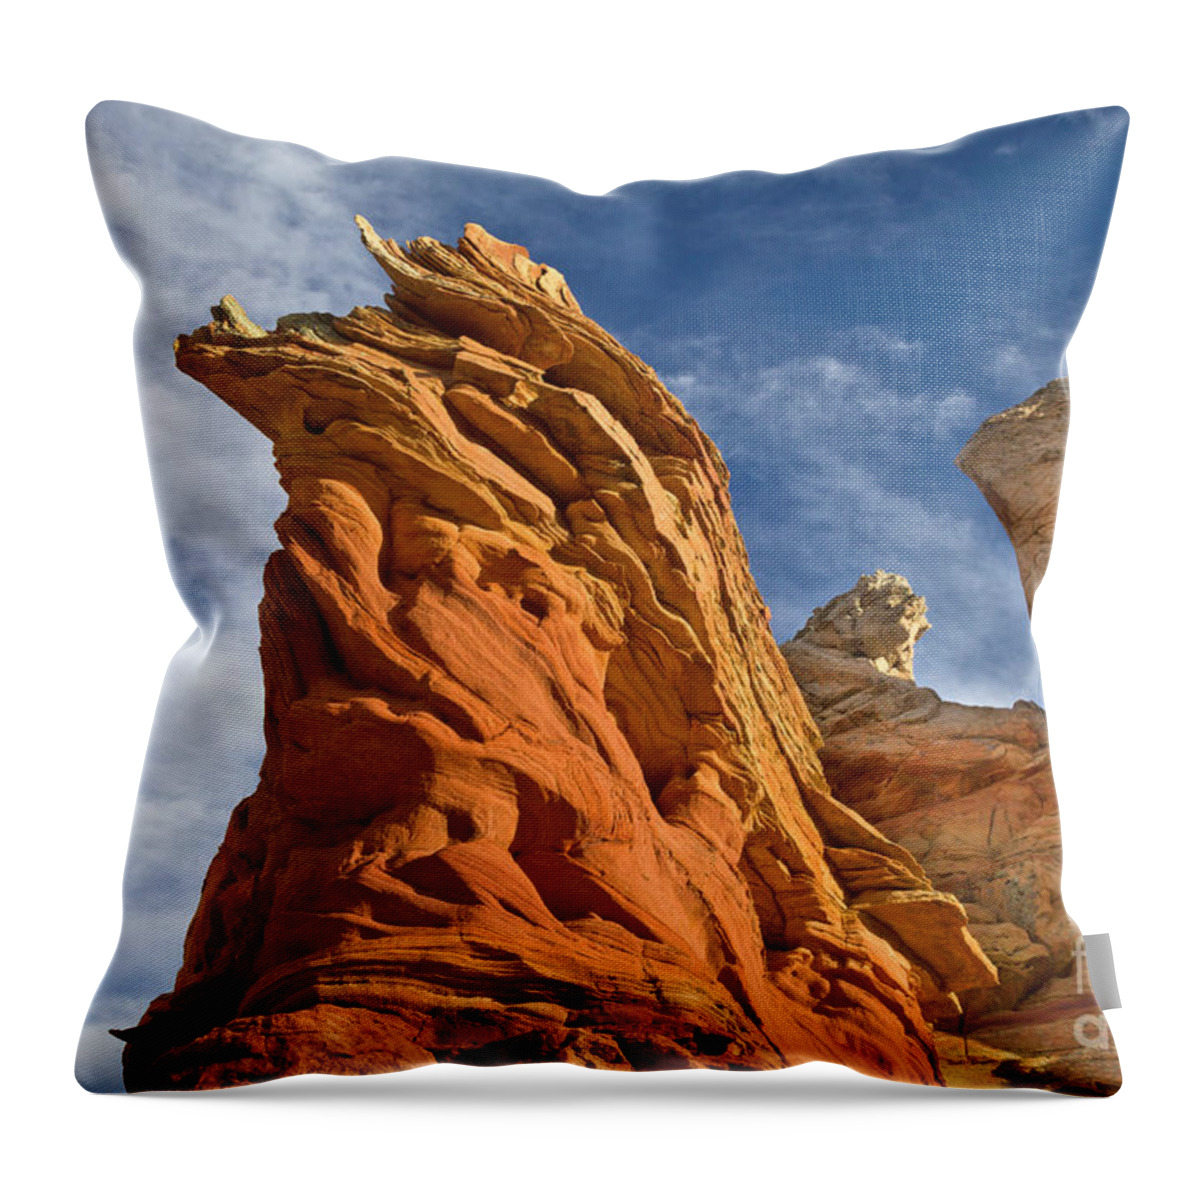 00559277 Throw Pillow featuring the photograph Eroded Sandstone Vermillion Cliffs by Yva Momatiuk John Eastcott